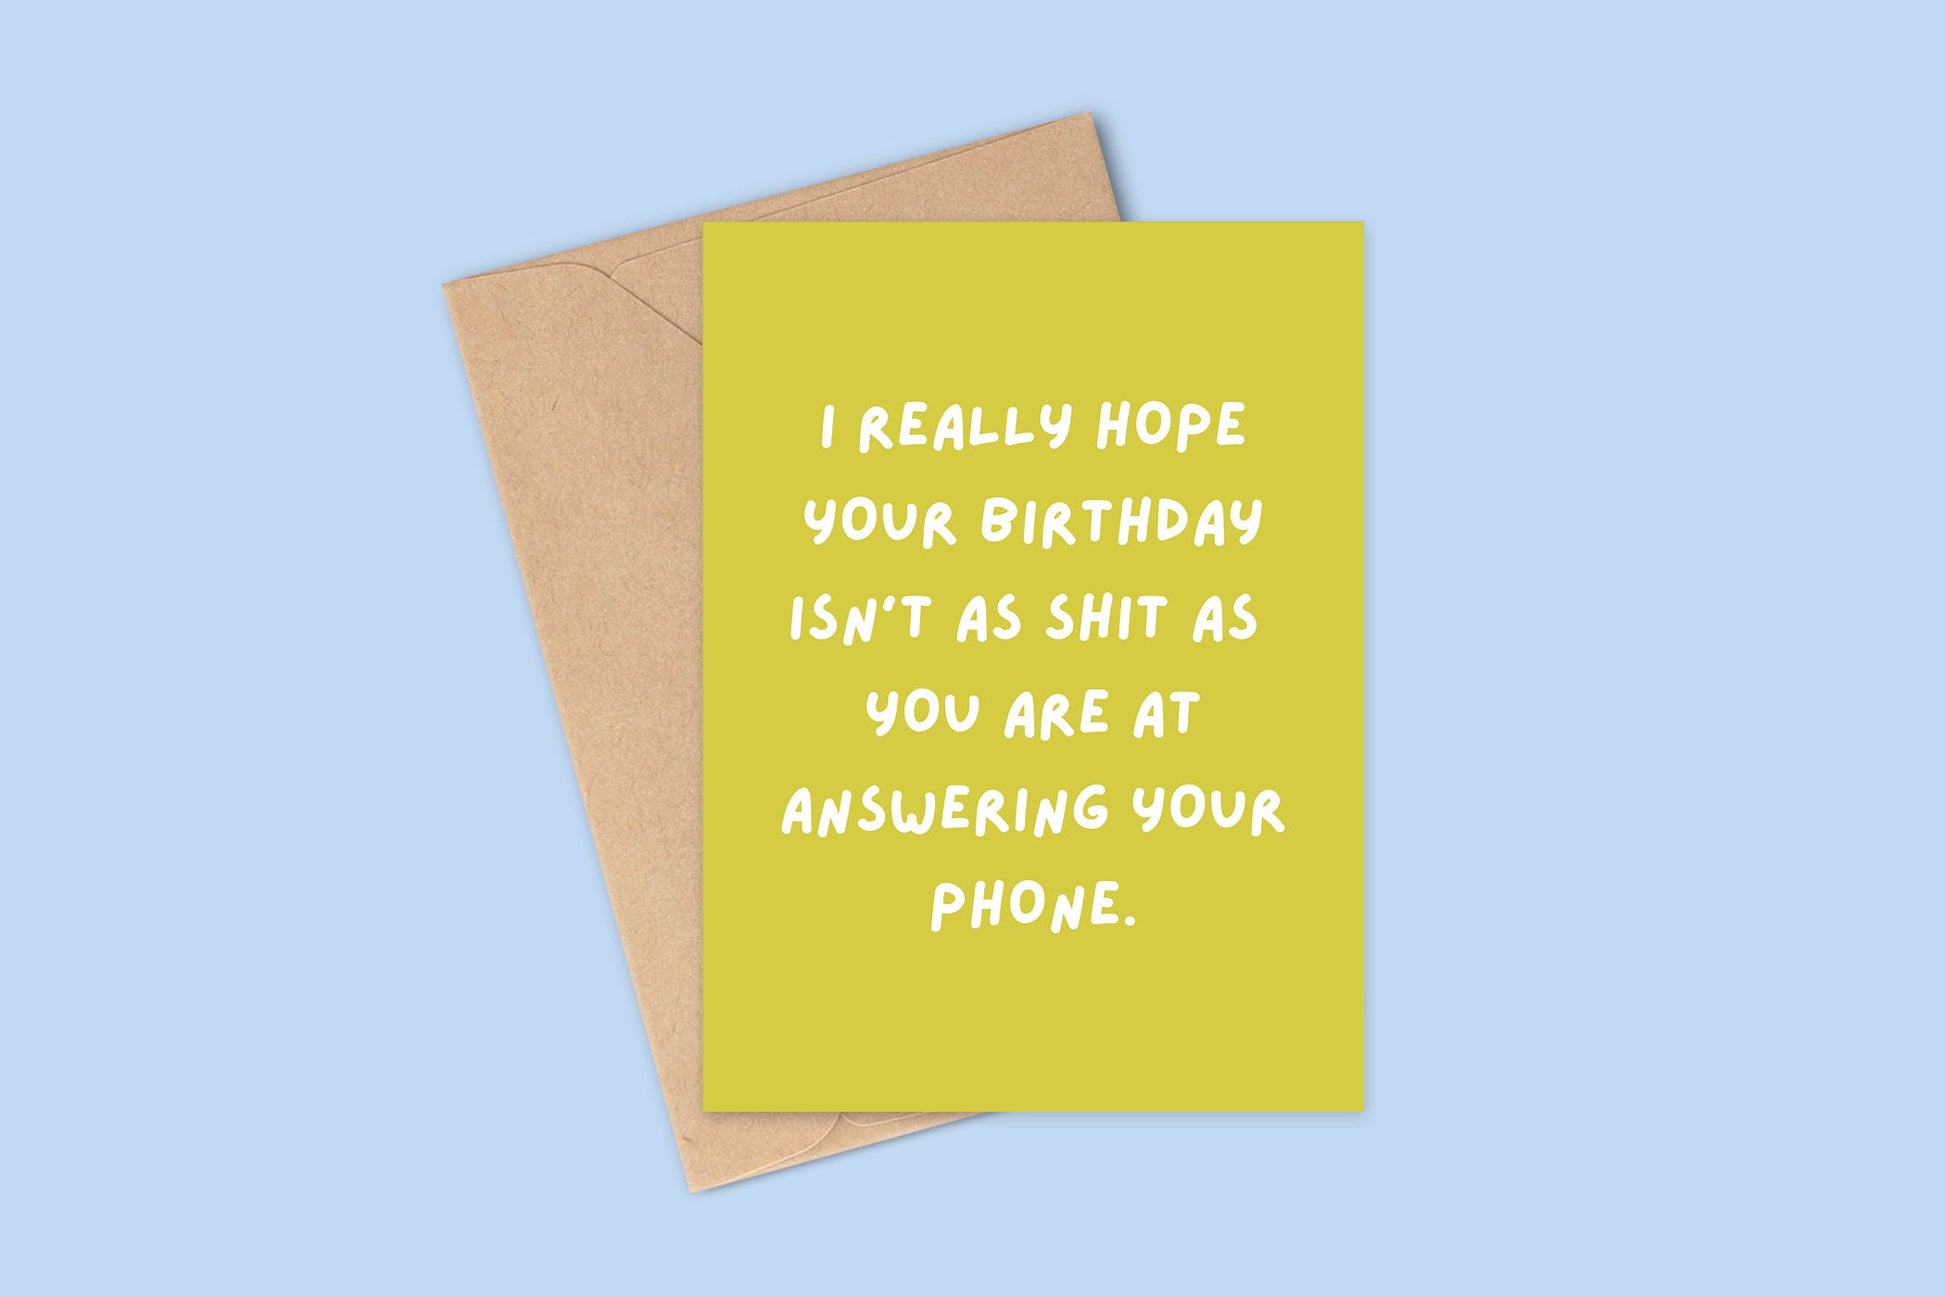 Funny Birthday Card For Friend, Card For Friend That Never Answers Their Phone, Funny Card, Birthday Card, Funny Birthday Cards